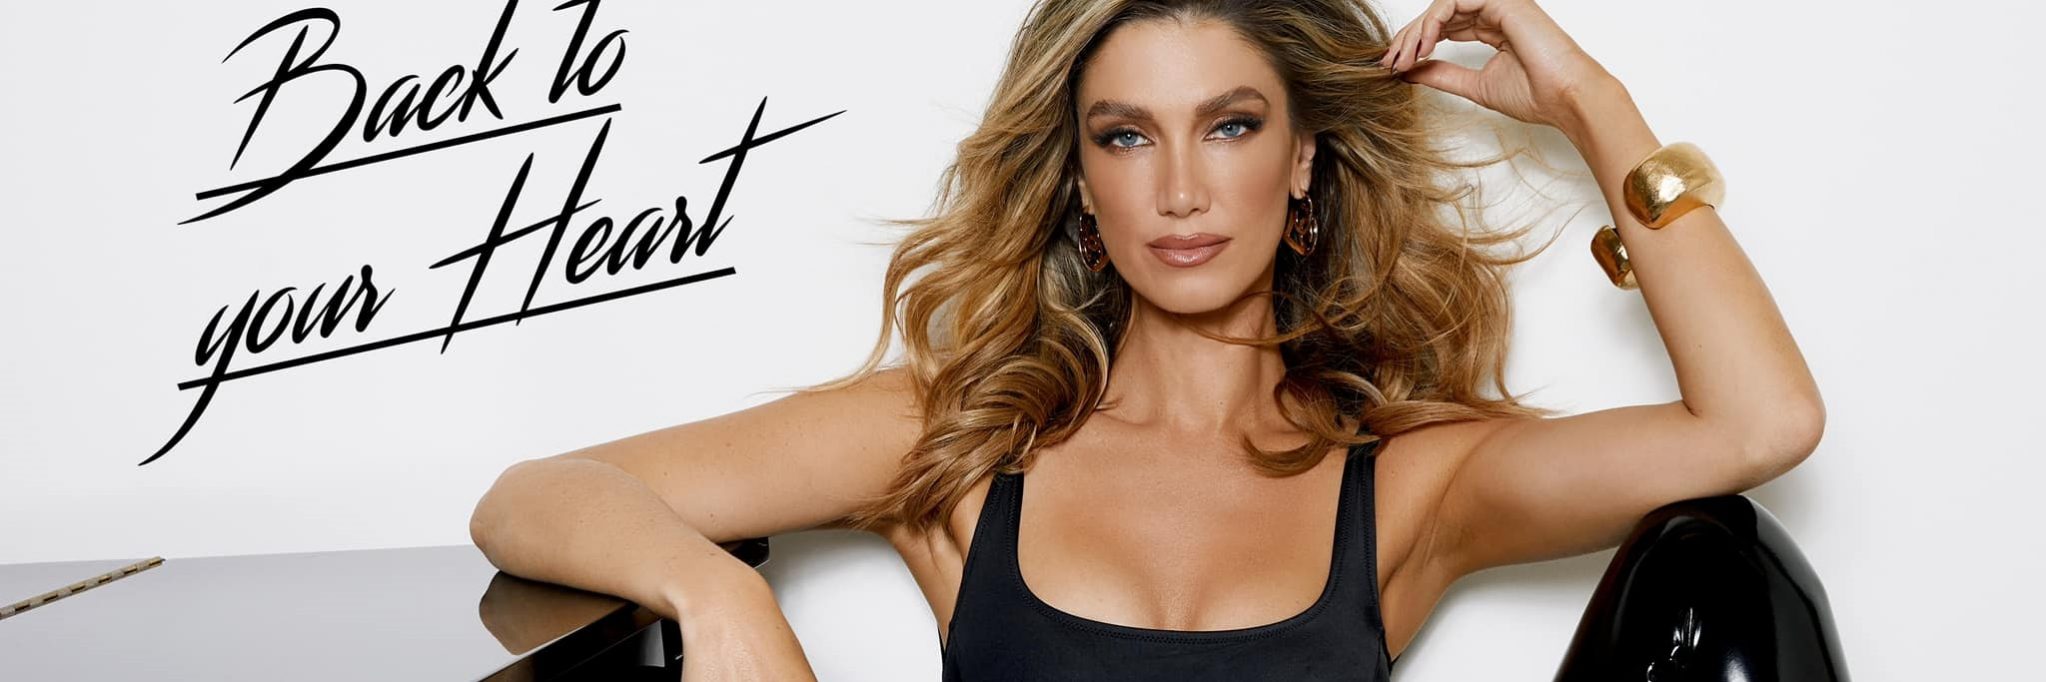 Australian singer-songwriter Delta Goodrem is back with her first new music in over two years.